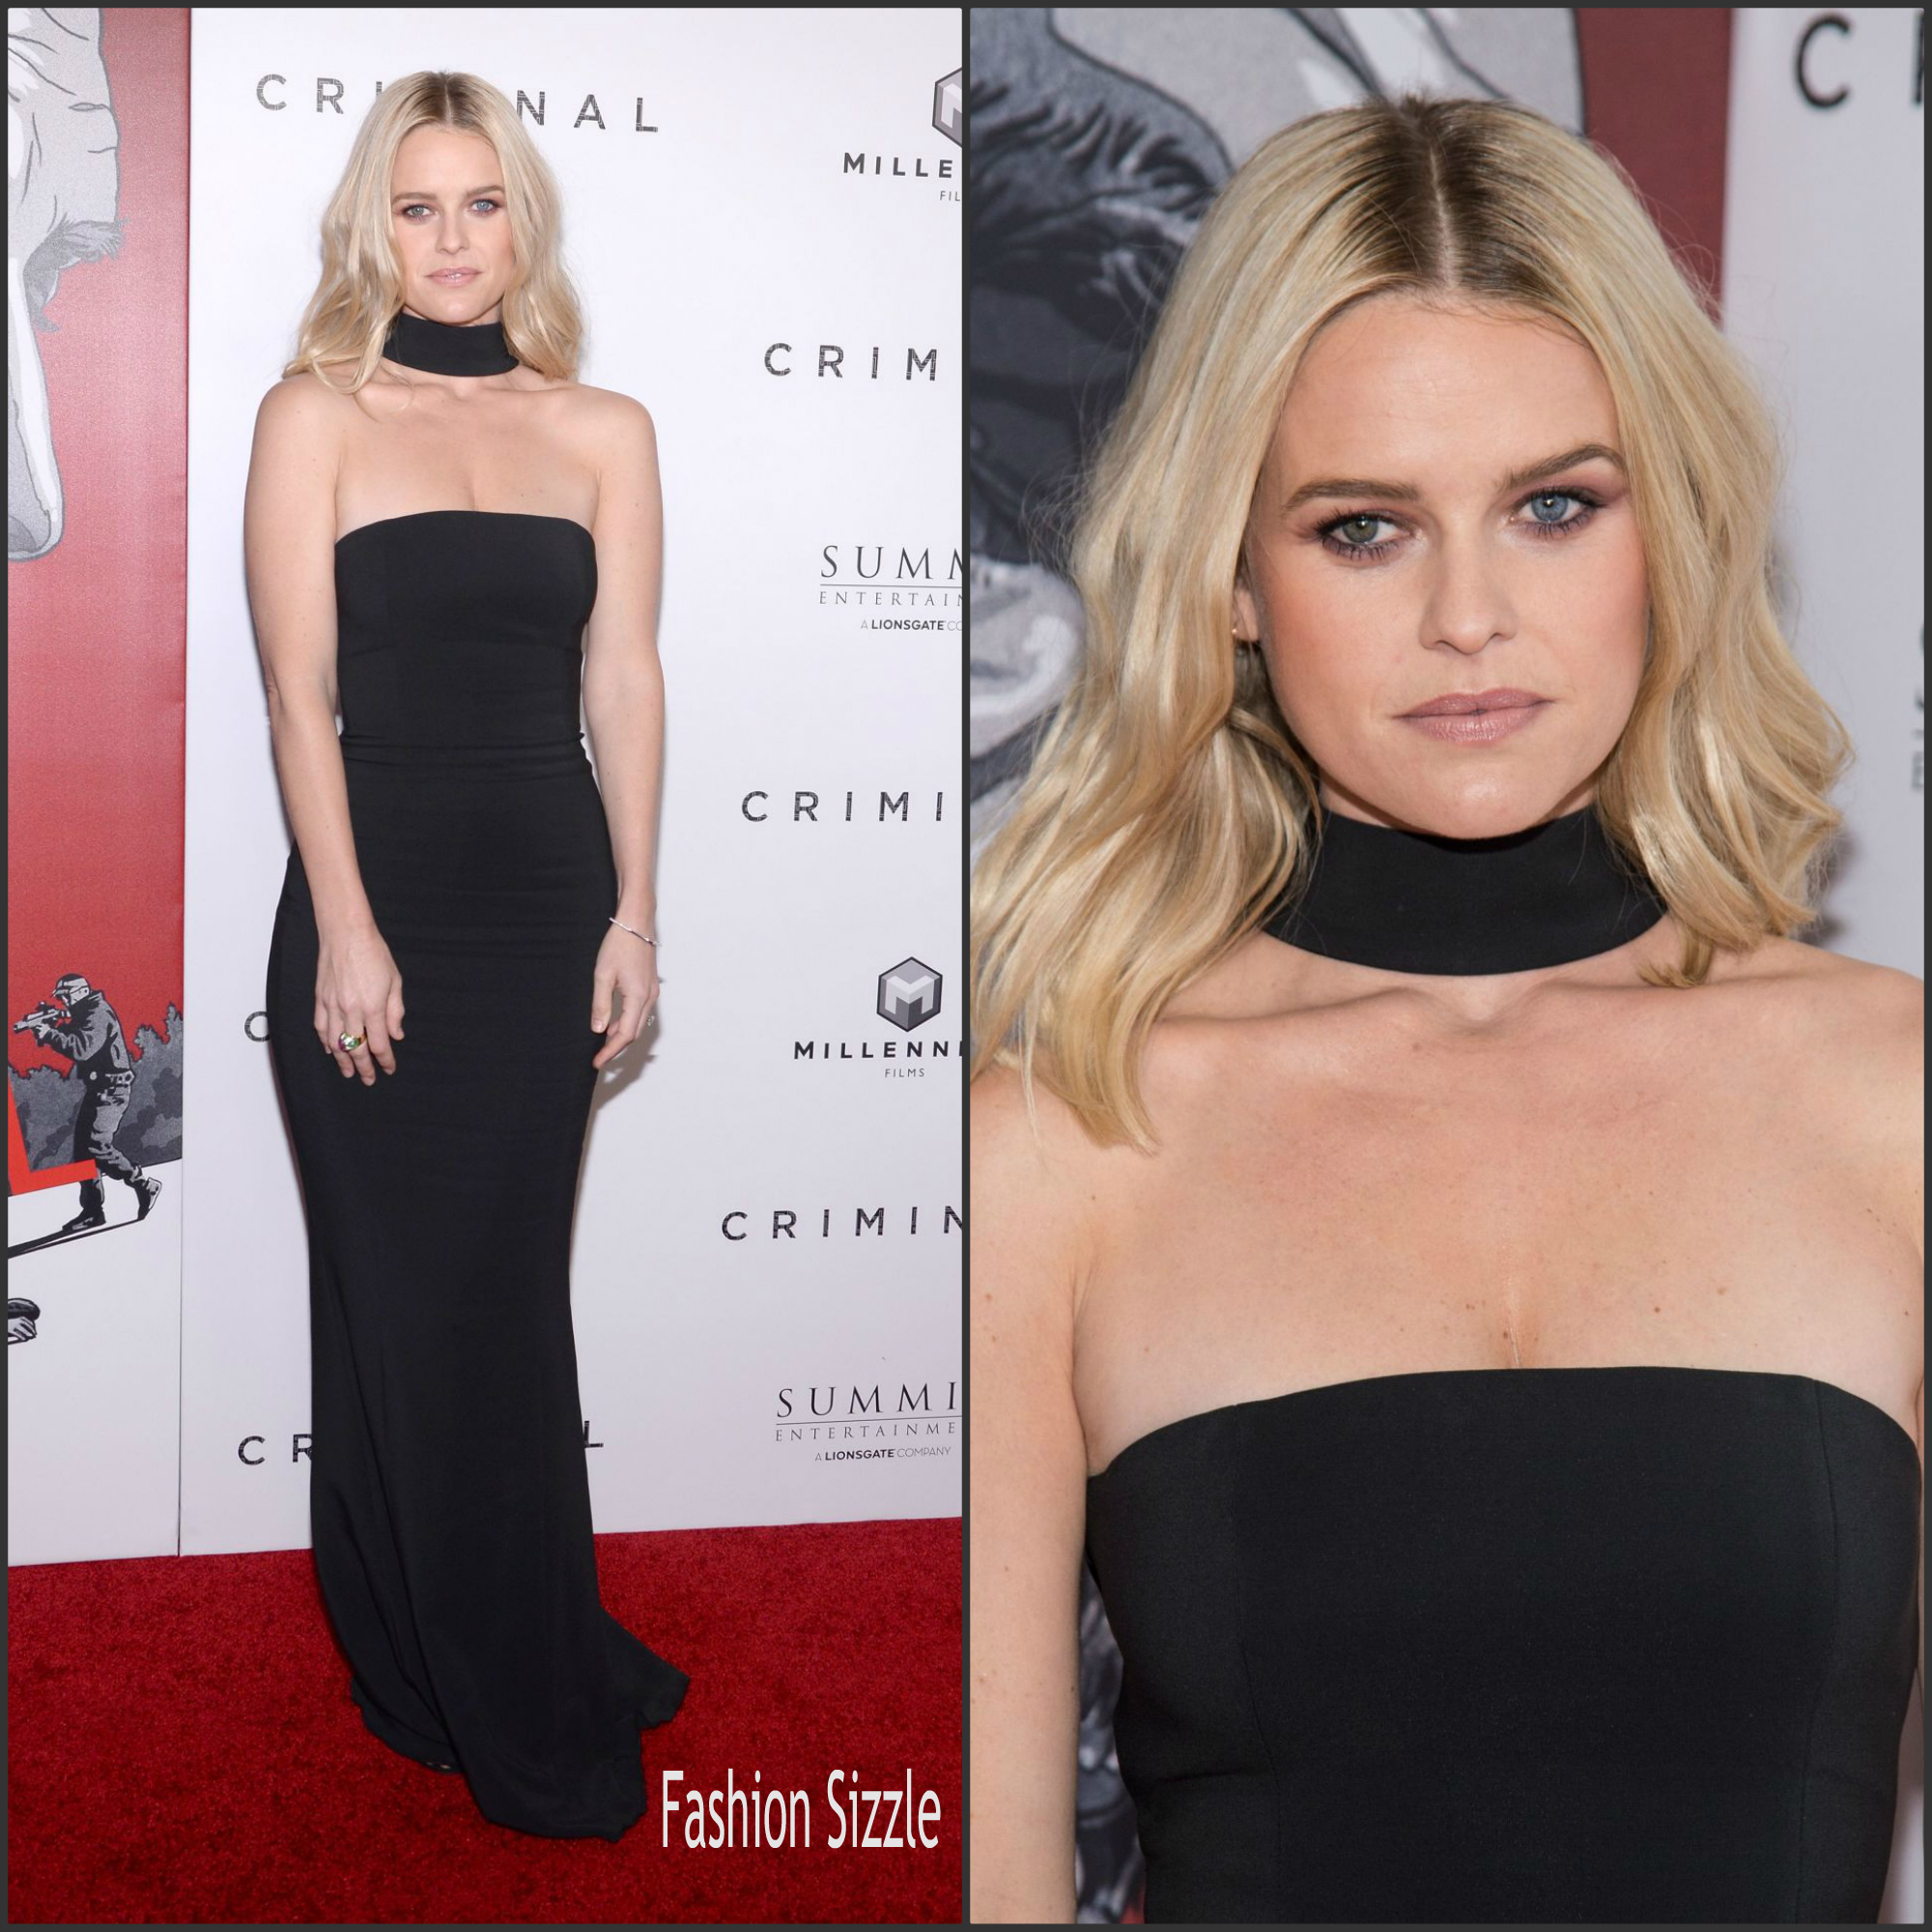 Alice Eve In Michael Kors At The Criminal New York Premiere Fashion Sizzle